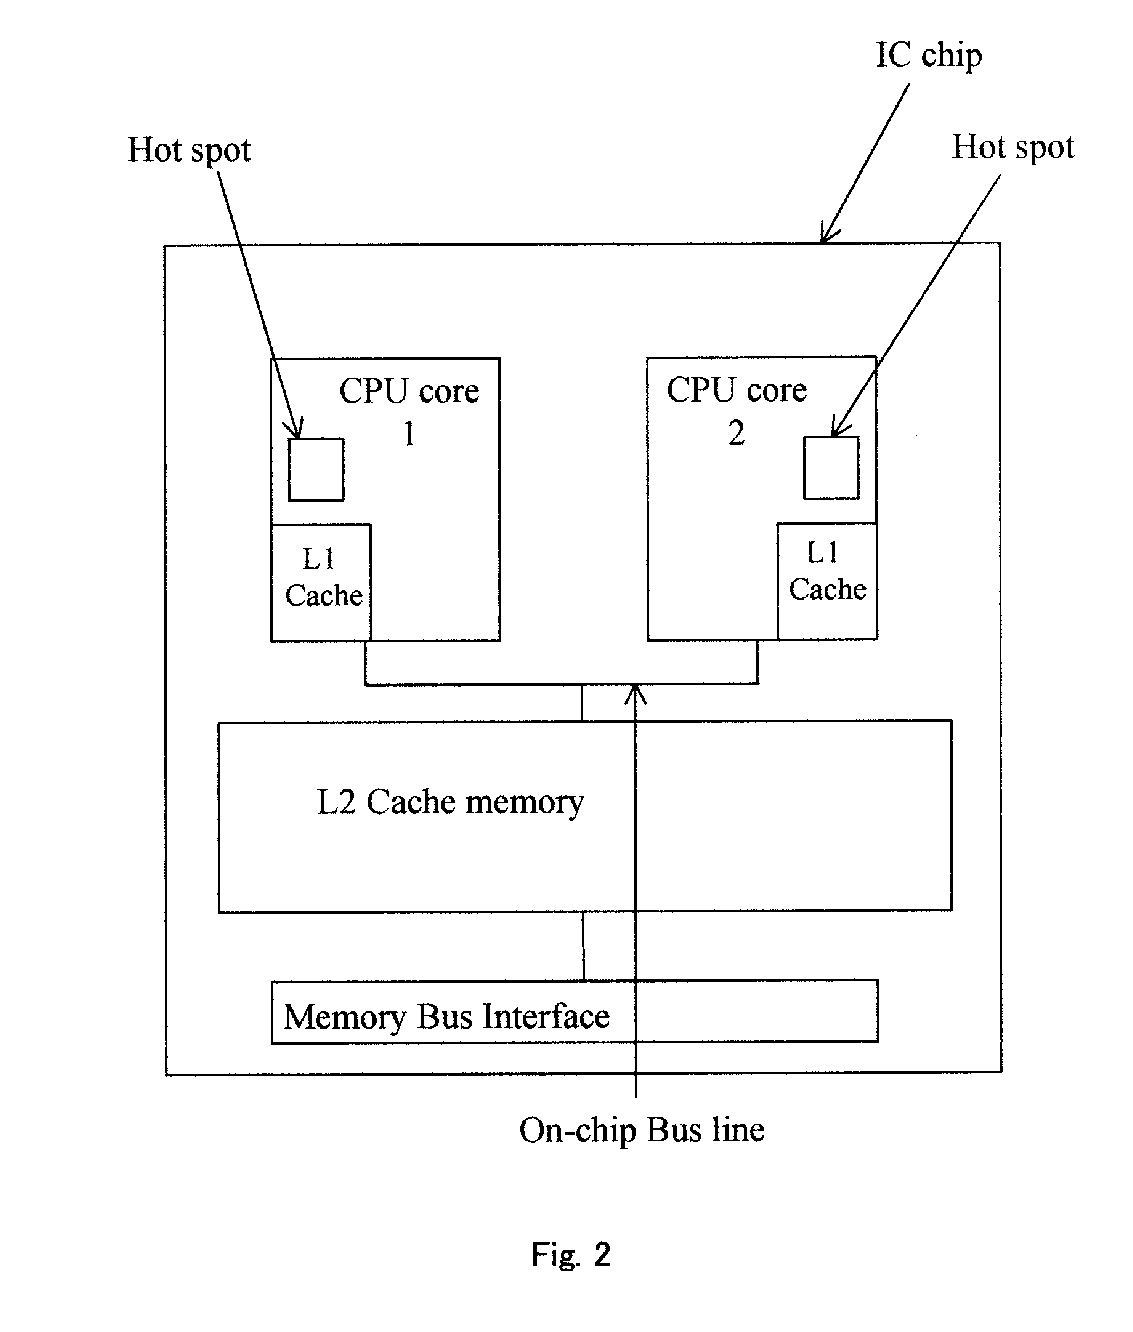 Chip layout for multiple CPU core microprocessor